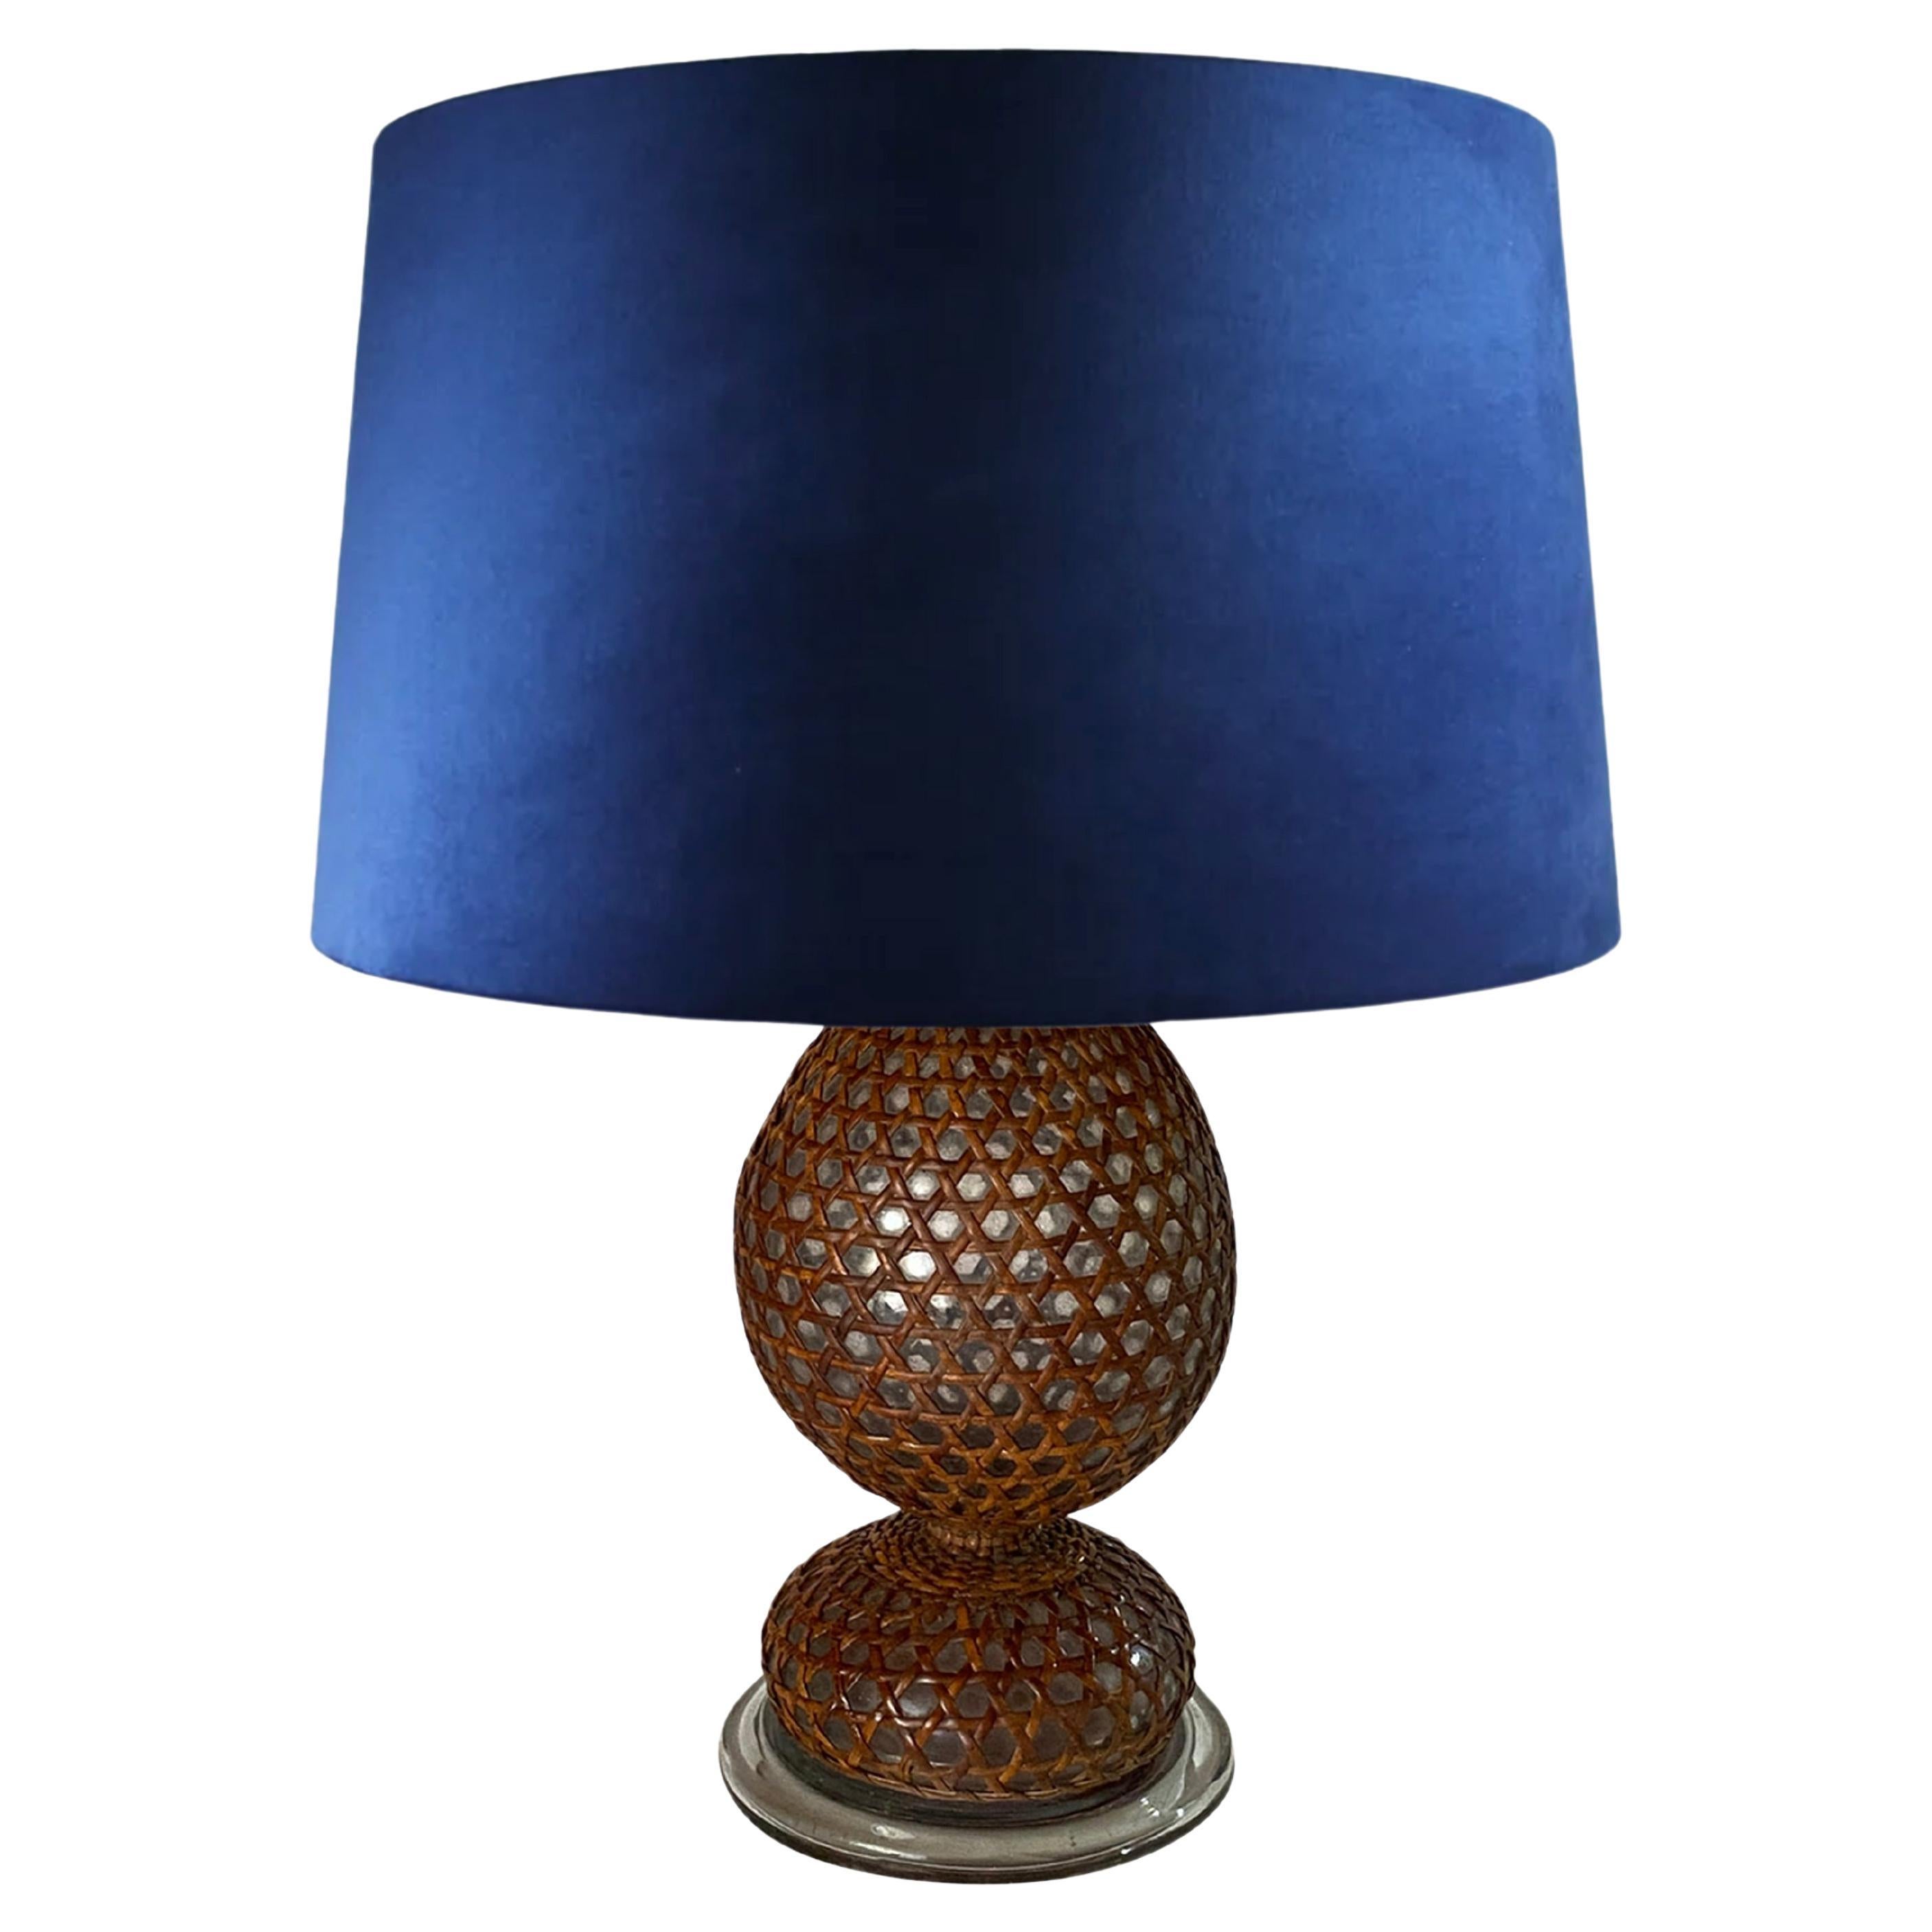 English Glass and Rattan Table Lamp, Made in England, Brown Color, Circa 1970 For Sale